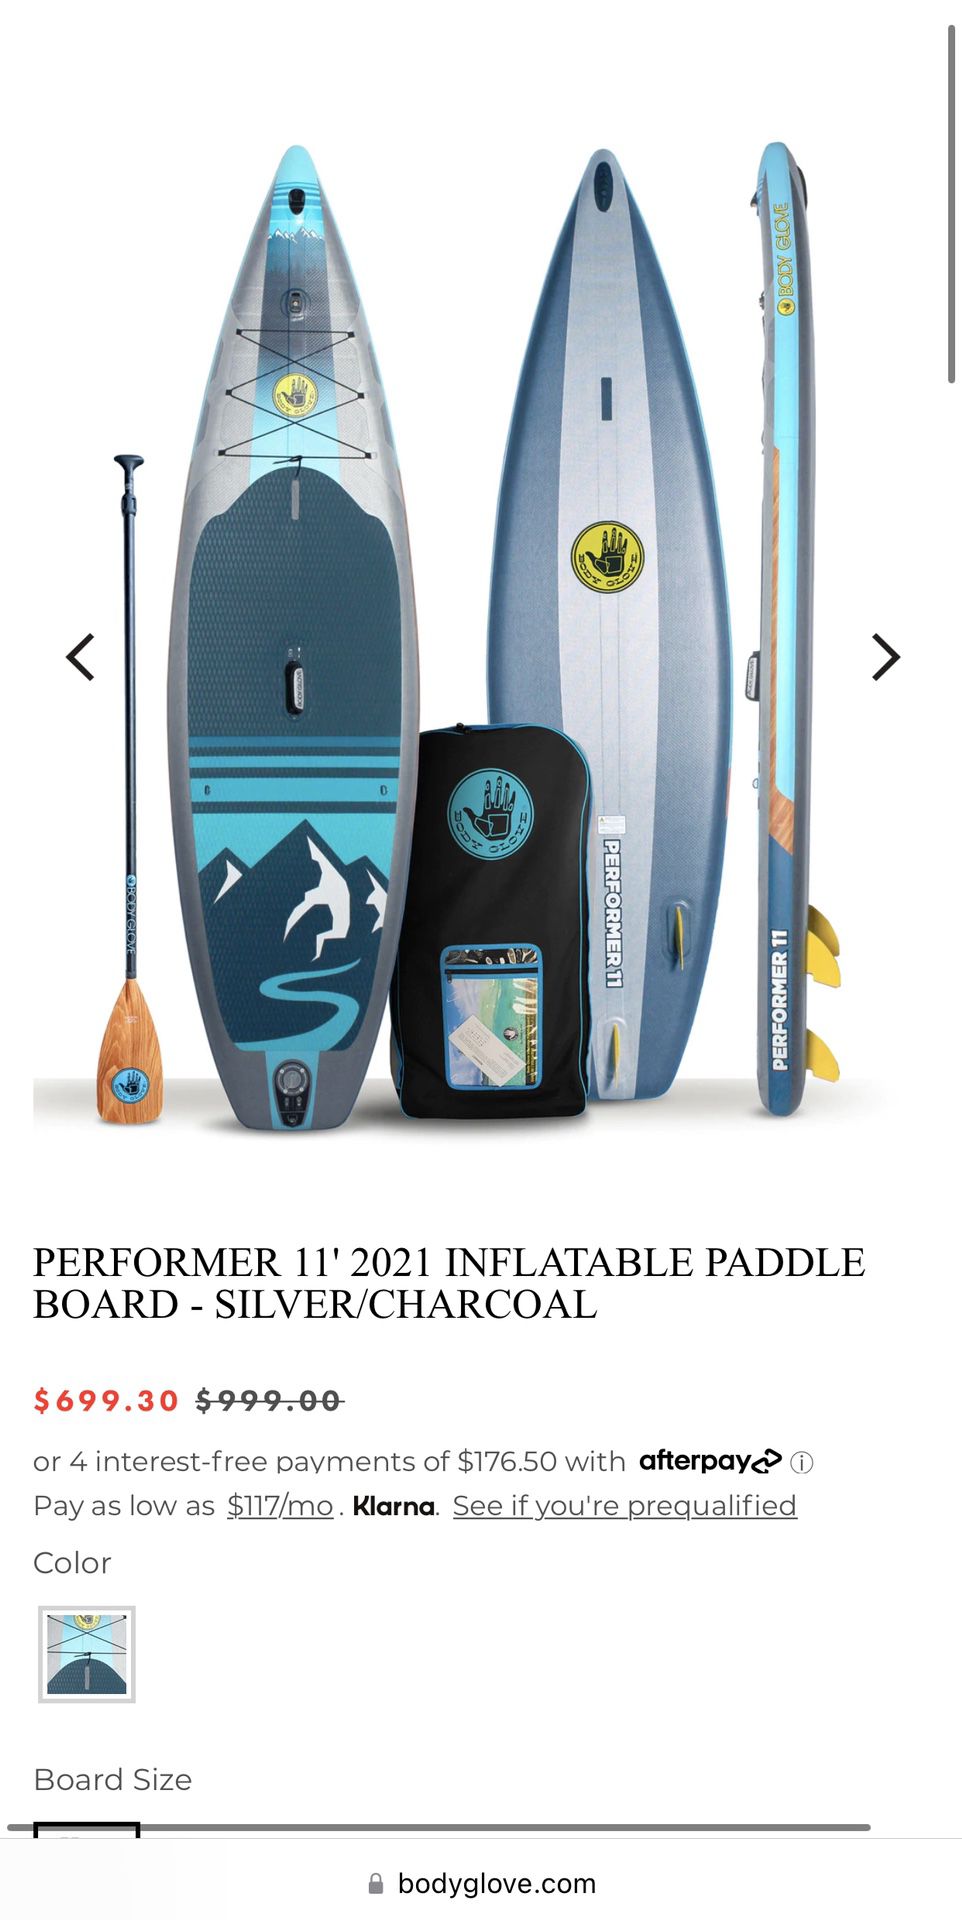 New in box Body Glove Performer 11' Inflatable Stand Up Paddleboard Package